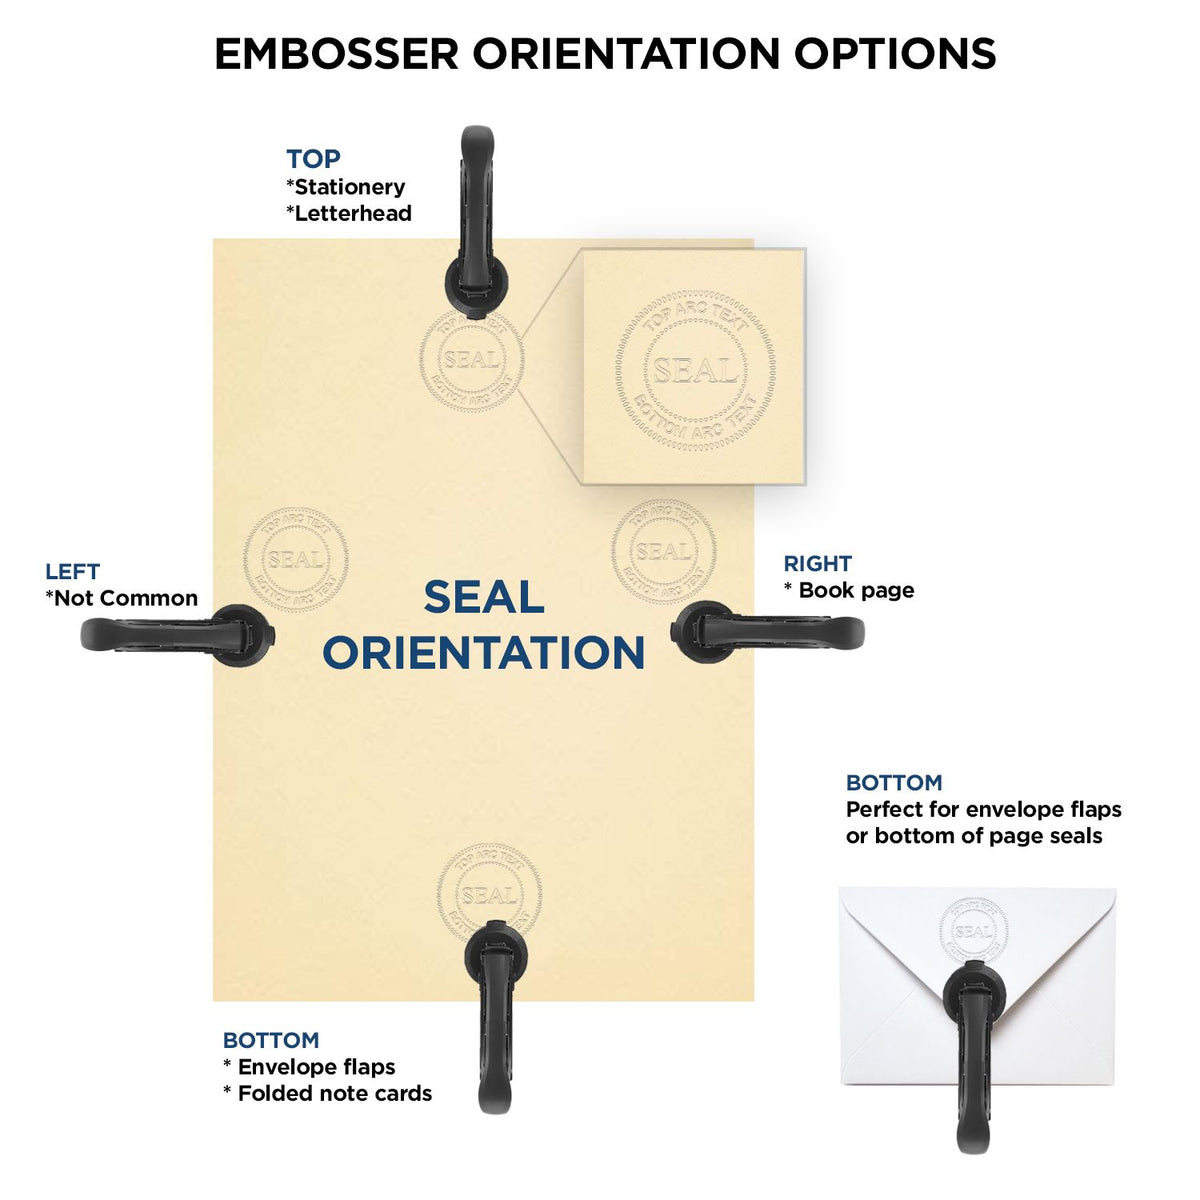 An infographic for the Handheld Hawaii Architect Seal Embosser showing embosser orientation, this is showing examples of a top, bottom, right and left insert.